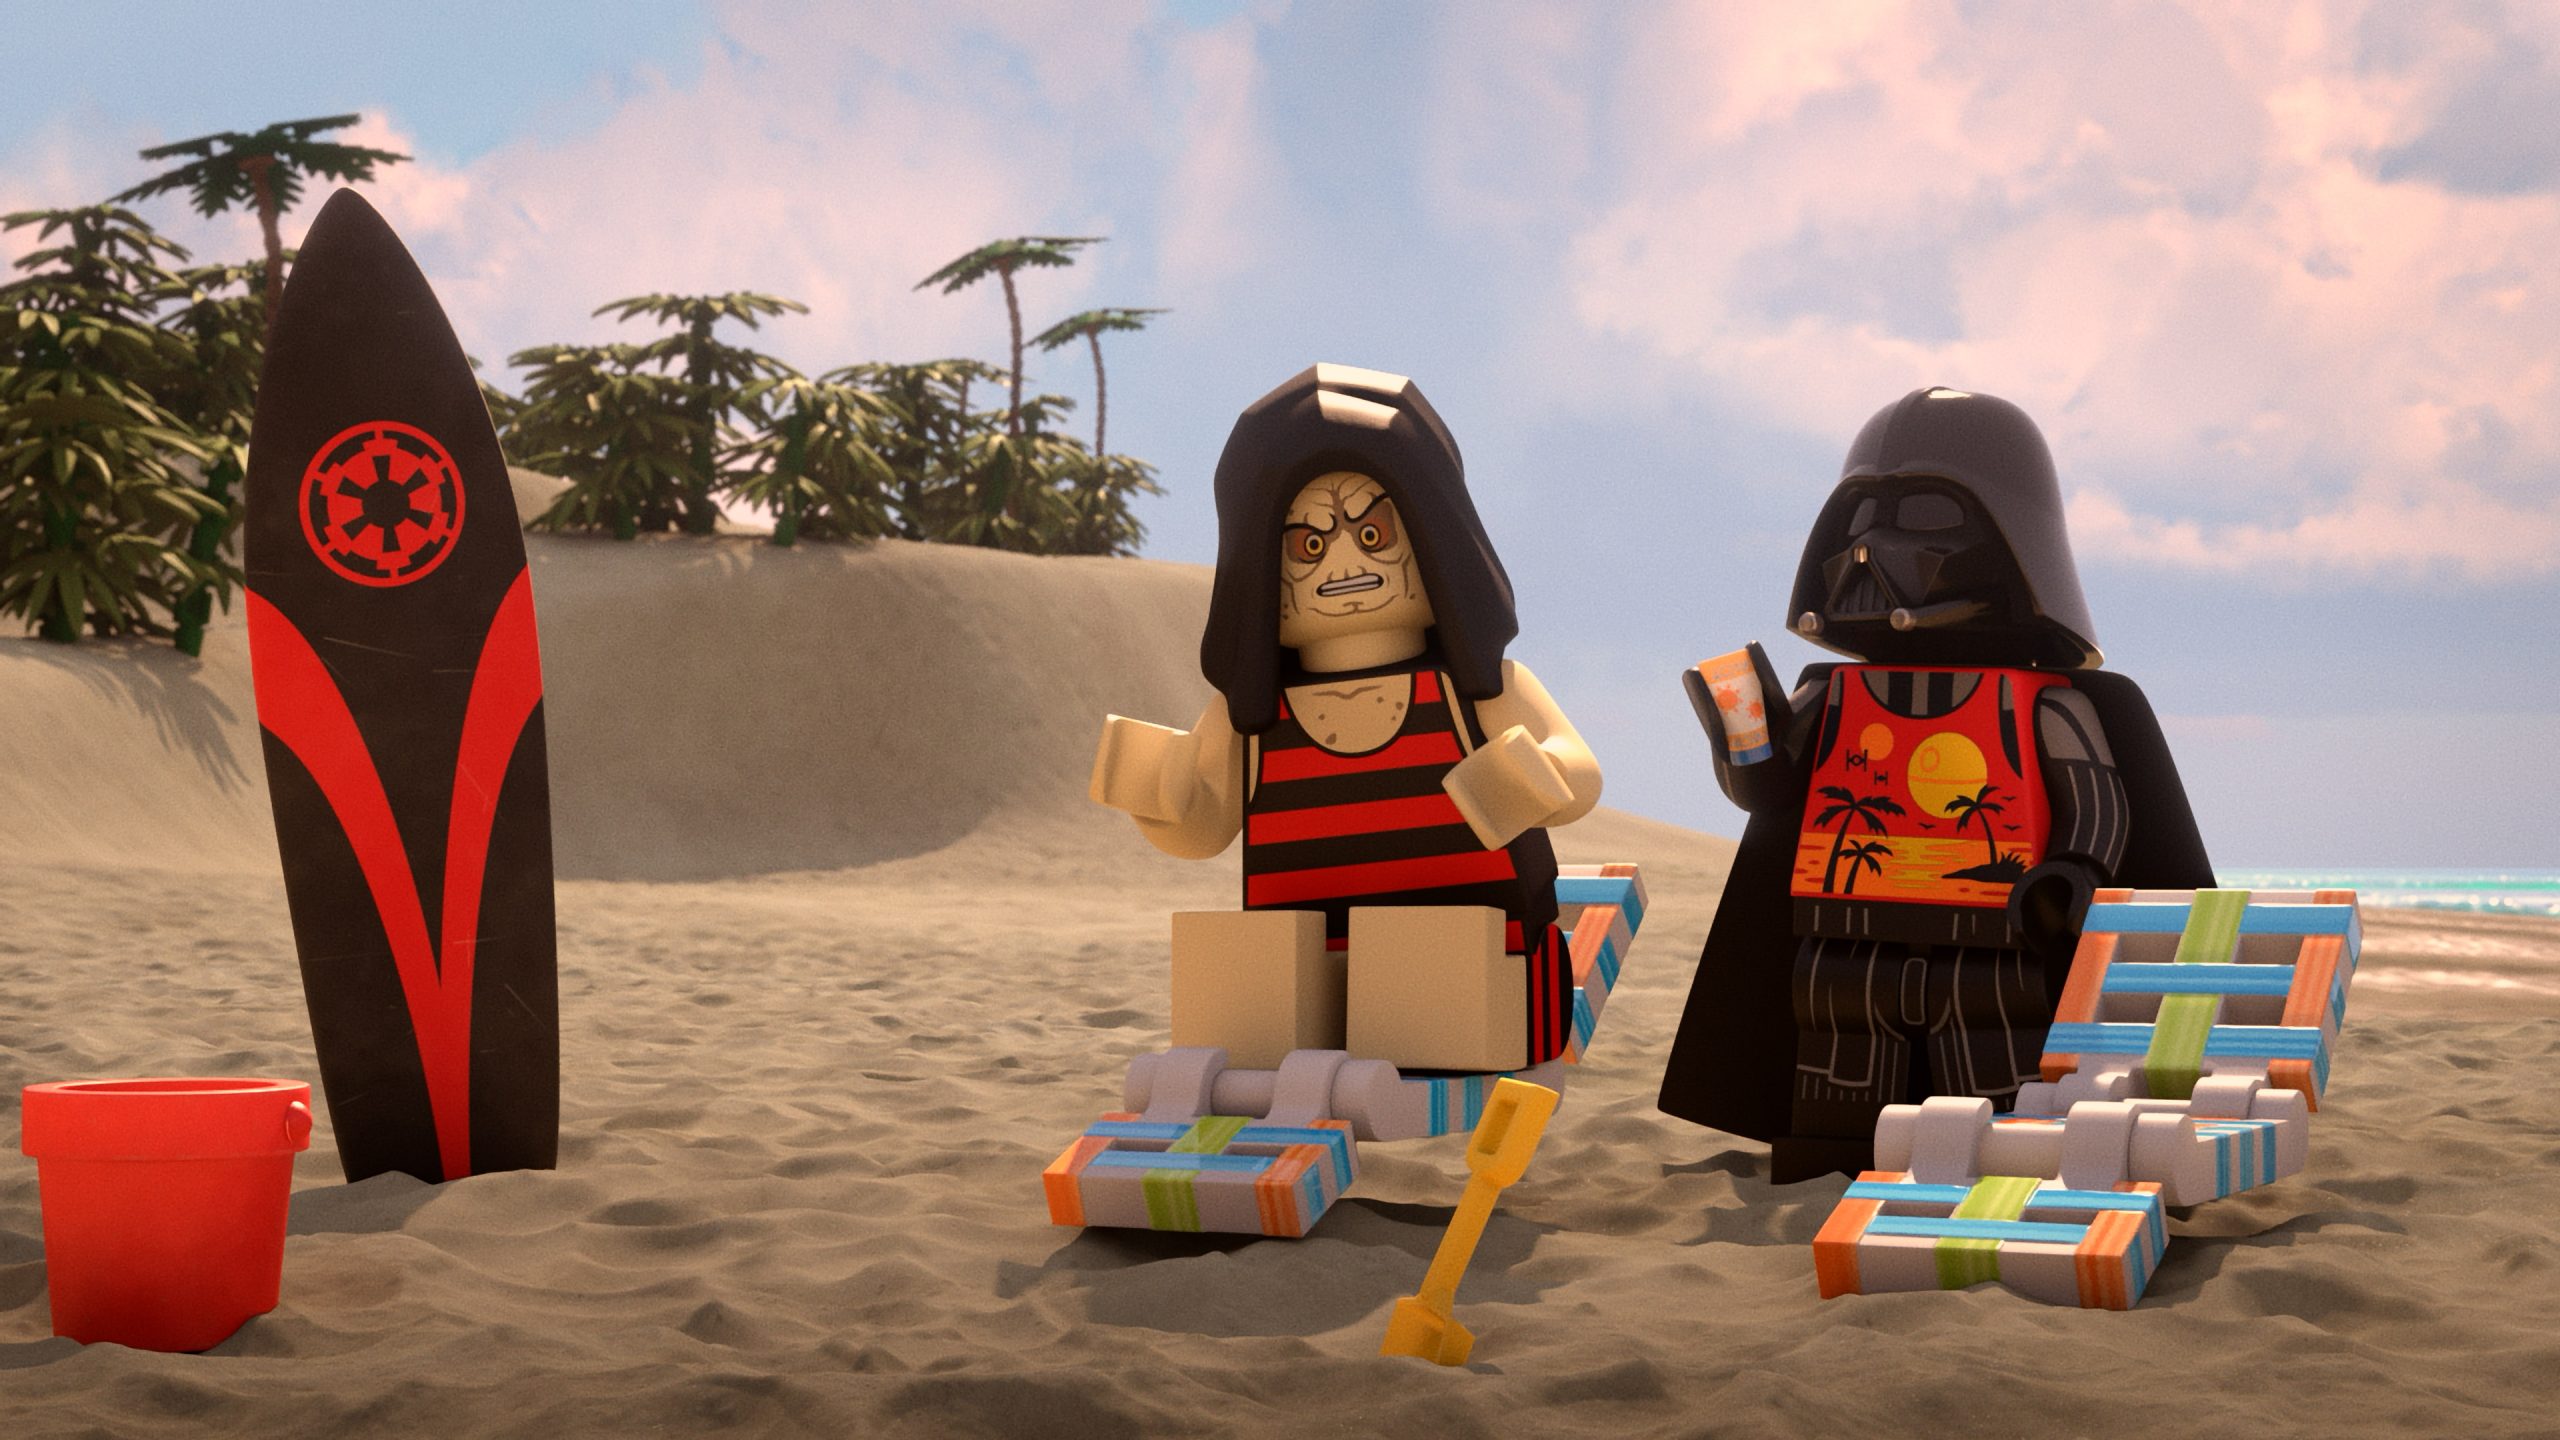 Review: 'LEGO Star Wars Summer Vacation’ is not a must-see, but might entertain you for an hour - Review